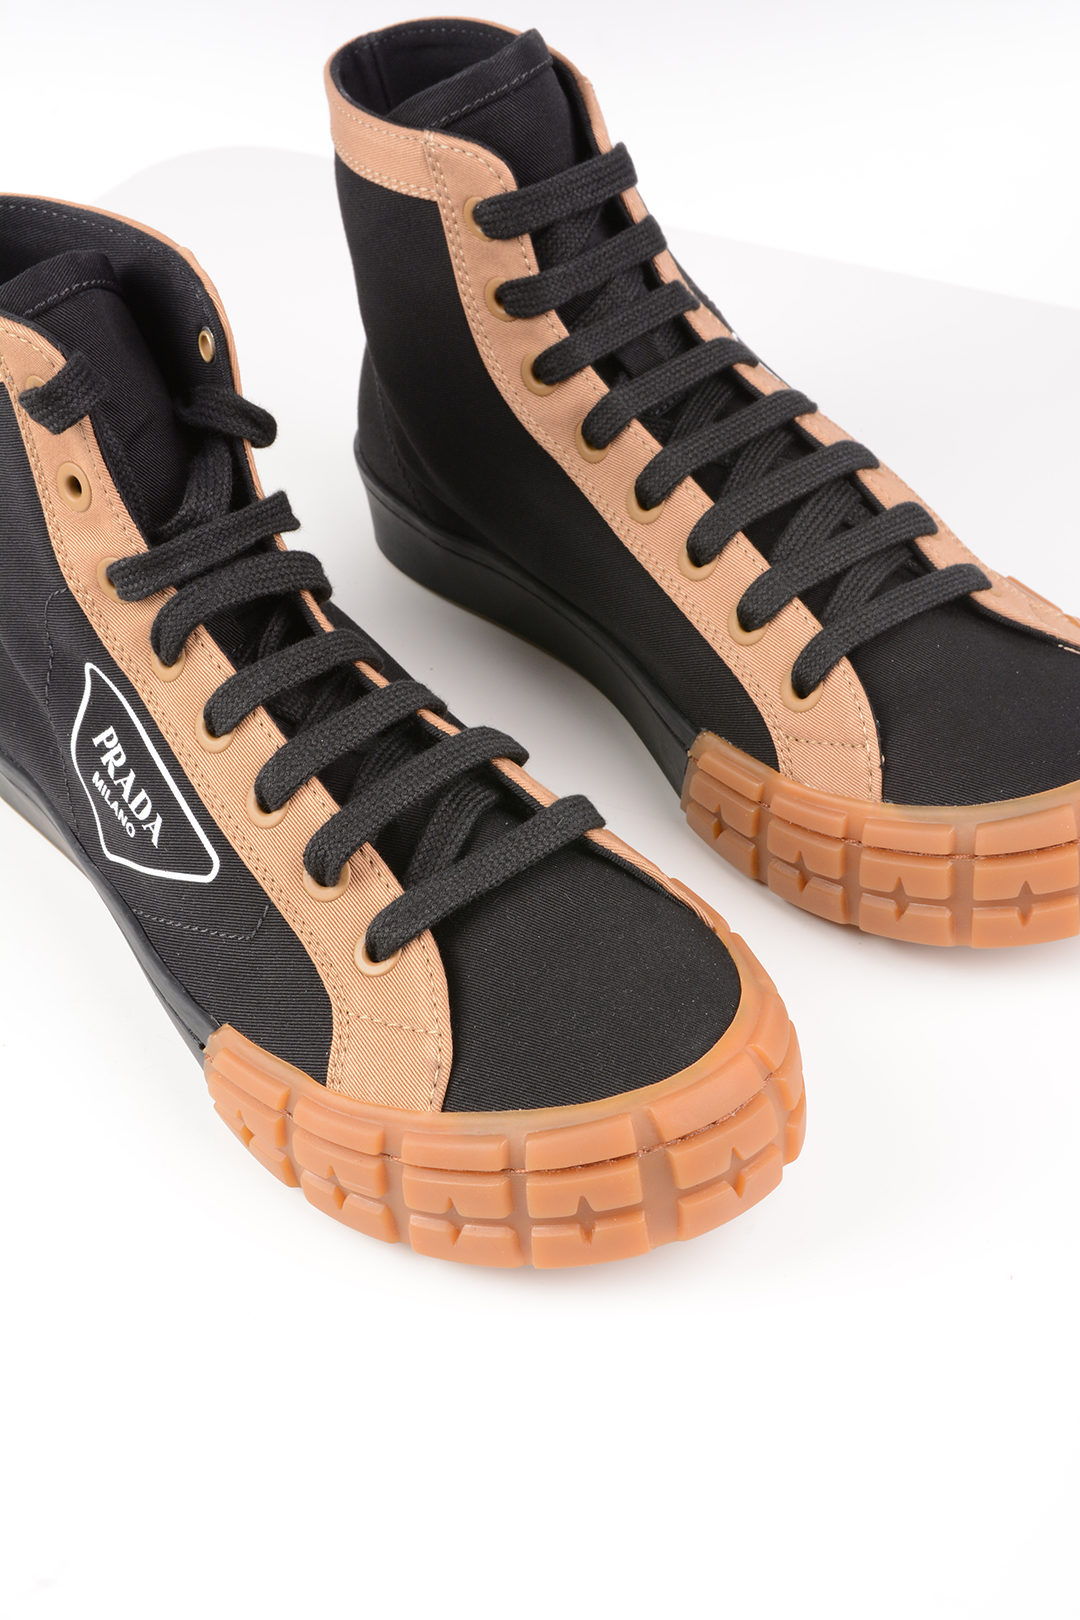 Prada Canvas High Top Sneakers men - Glamood Outlet